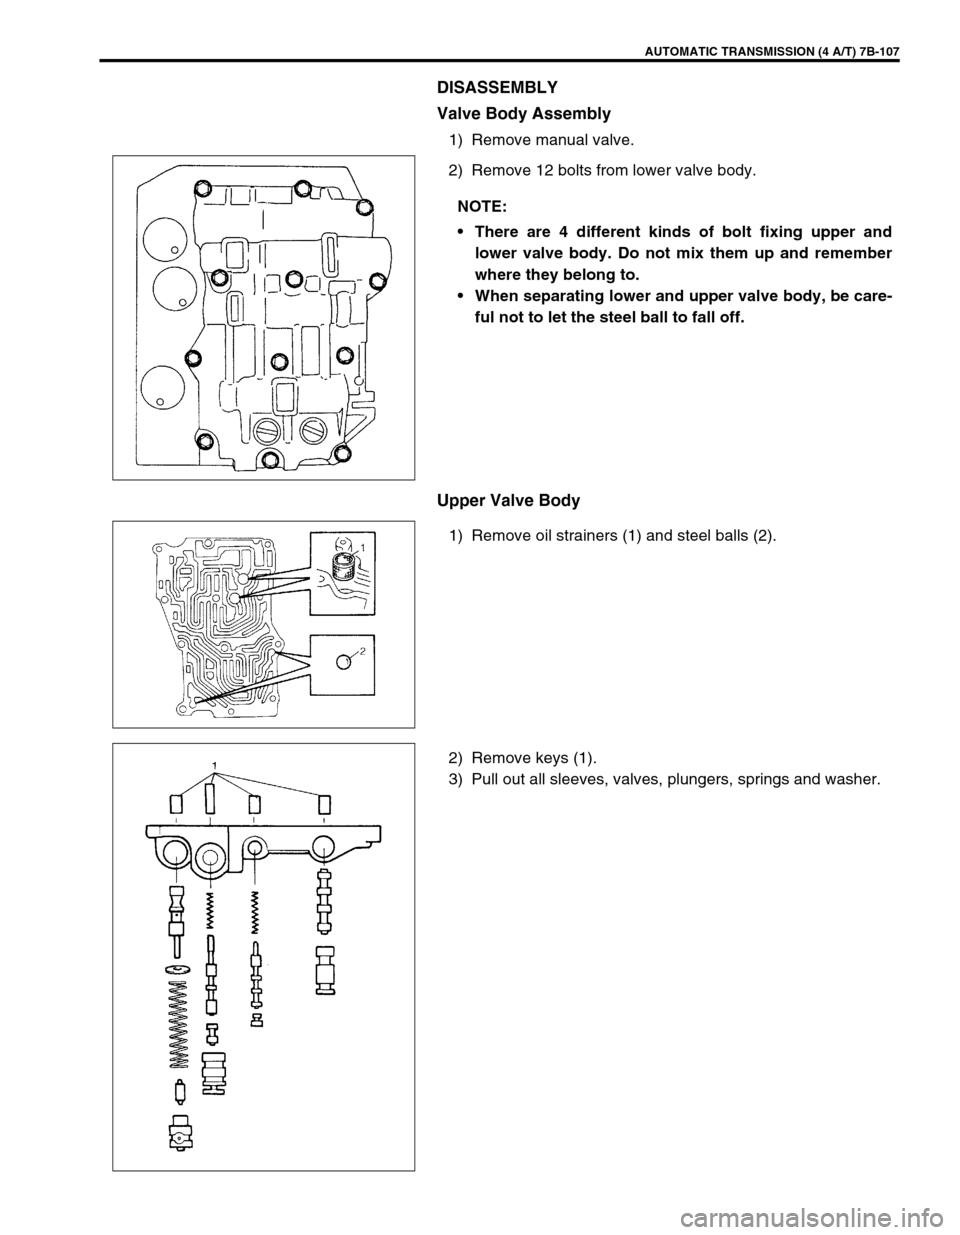 SUZUKI SWIFT 2000 1.G Transmission Service Workshop Manual AUTOMATIC TRANSMISSION (4 A/T) 7B-107
DISASSEMBLY
Valve Body Assembly
1) Remove manual valve.
2) Remove 12 bolts from lower valve body.
Upper Valve Body
1) Remove oil strainers (1) and steel balls (2)